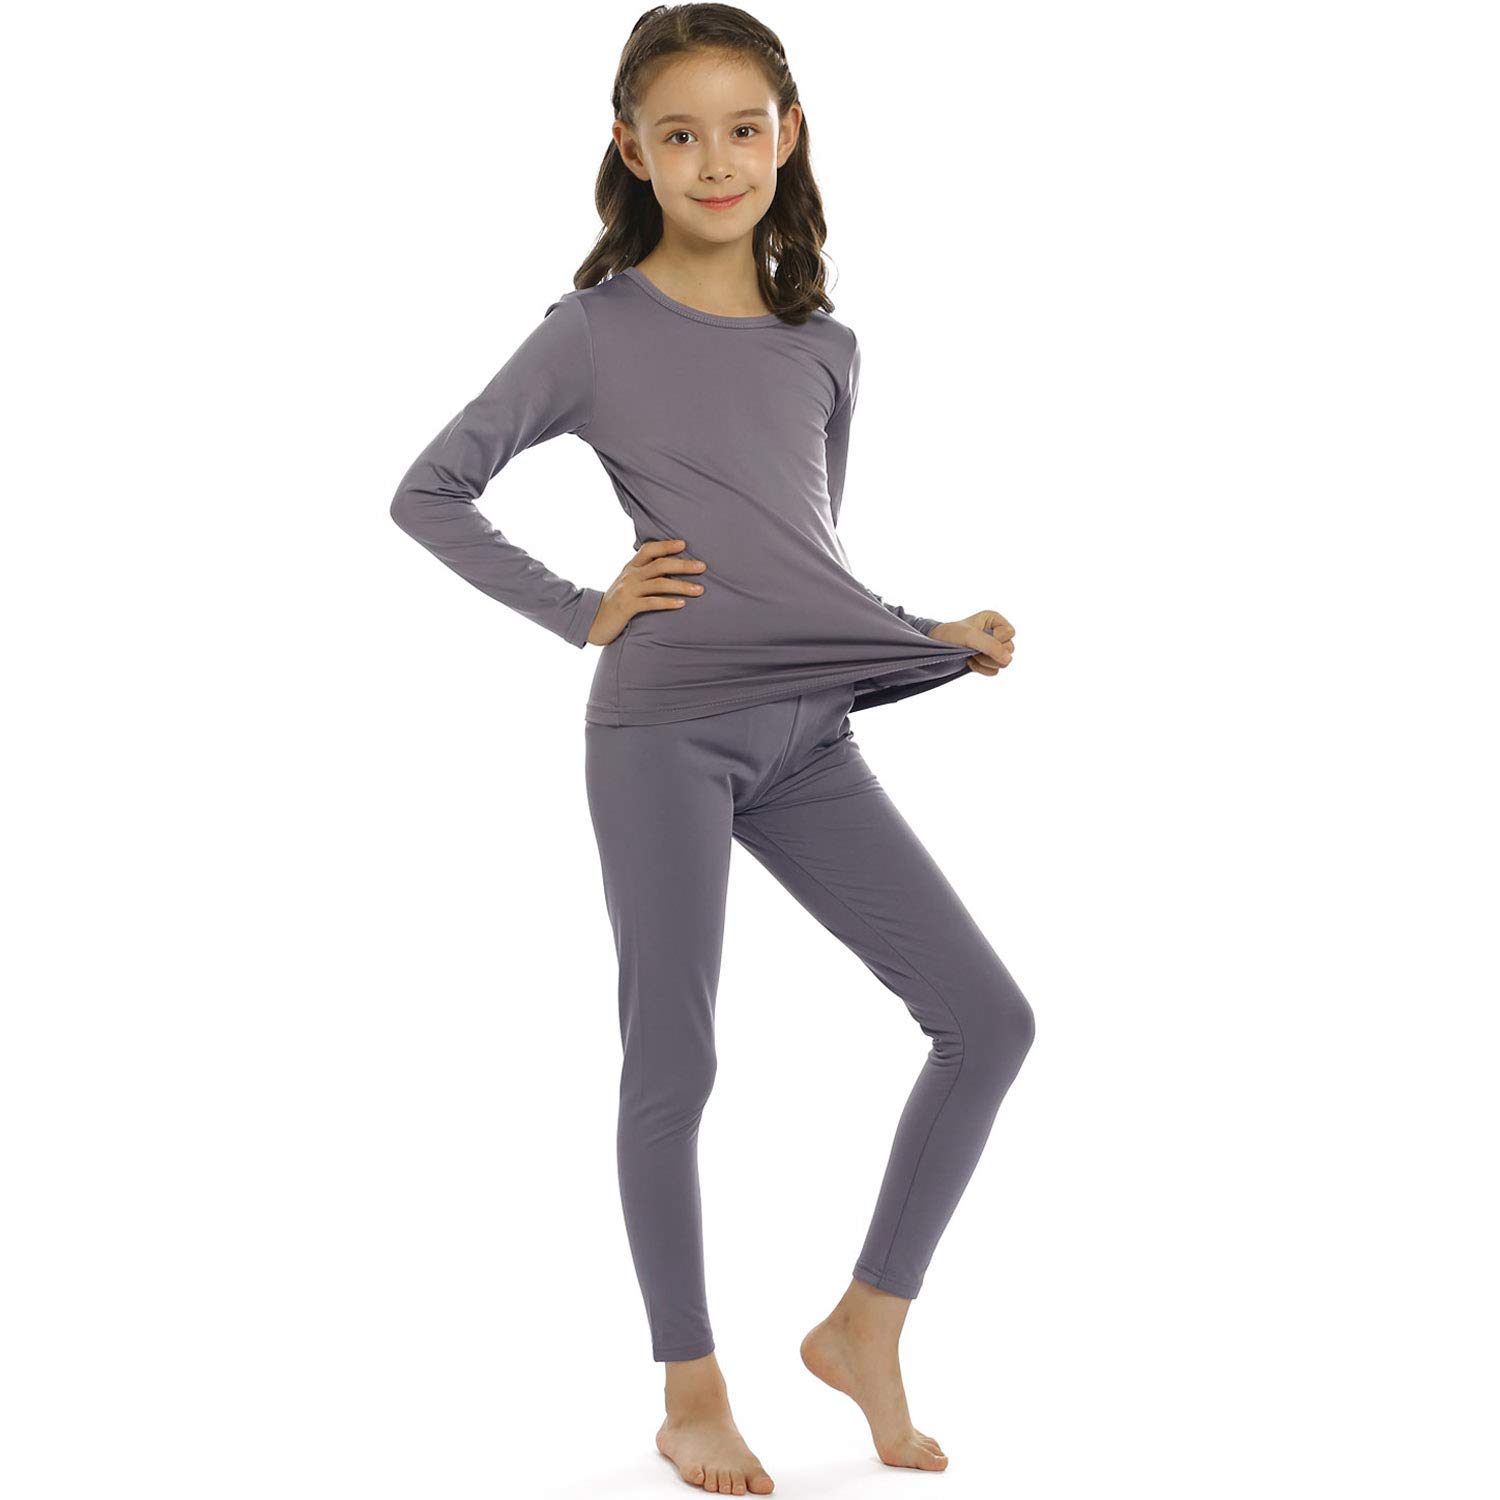 ViCherub Girls Thermal Underwear Set for Kids Long Johns Fleece Lined Base Layer Top & Bottom Cold Winter Thermals